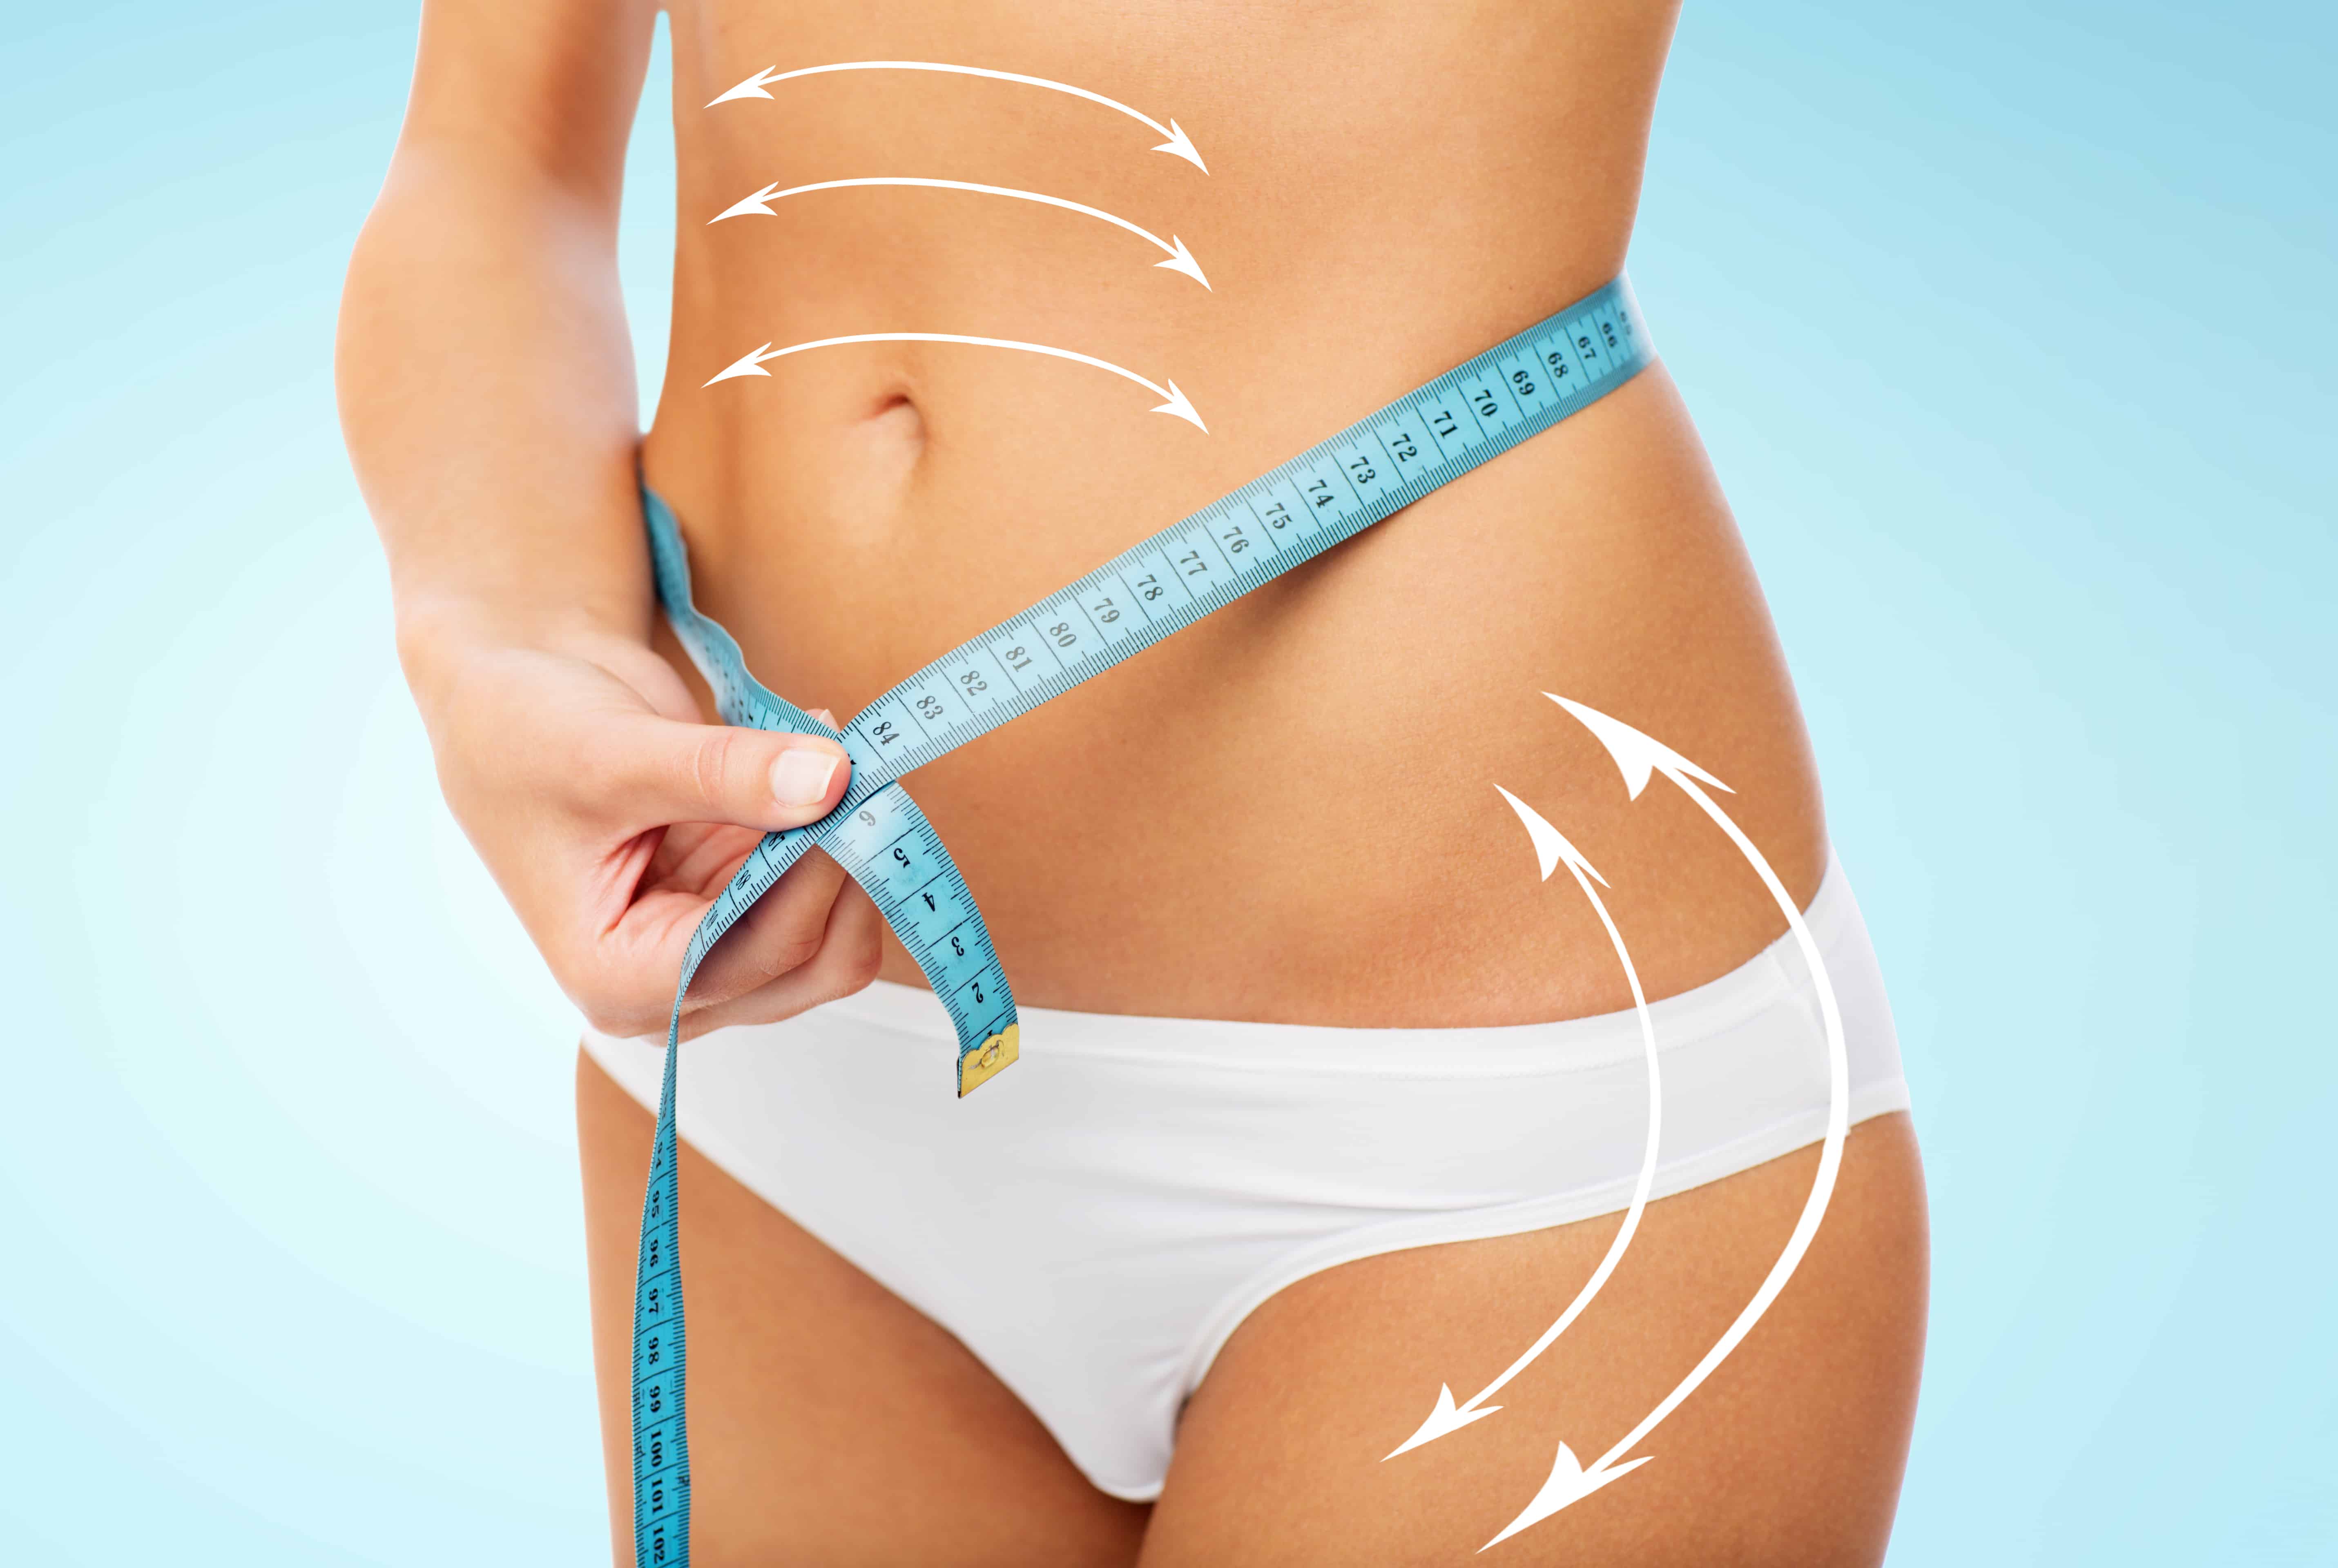 Laser Lipo Side Effects - What to Expect After Treatment